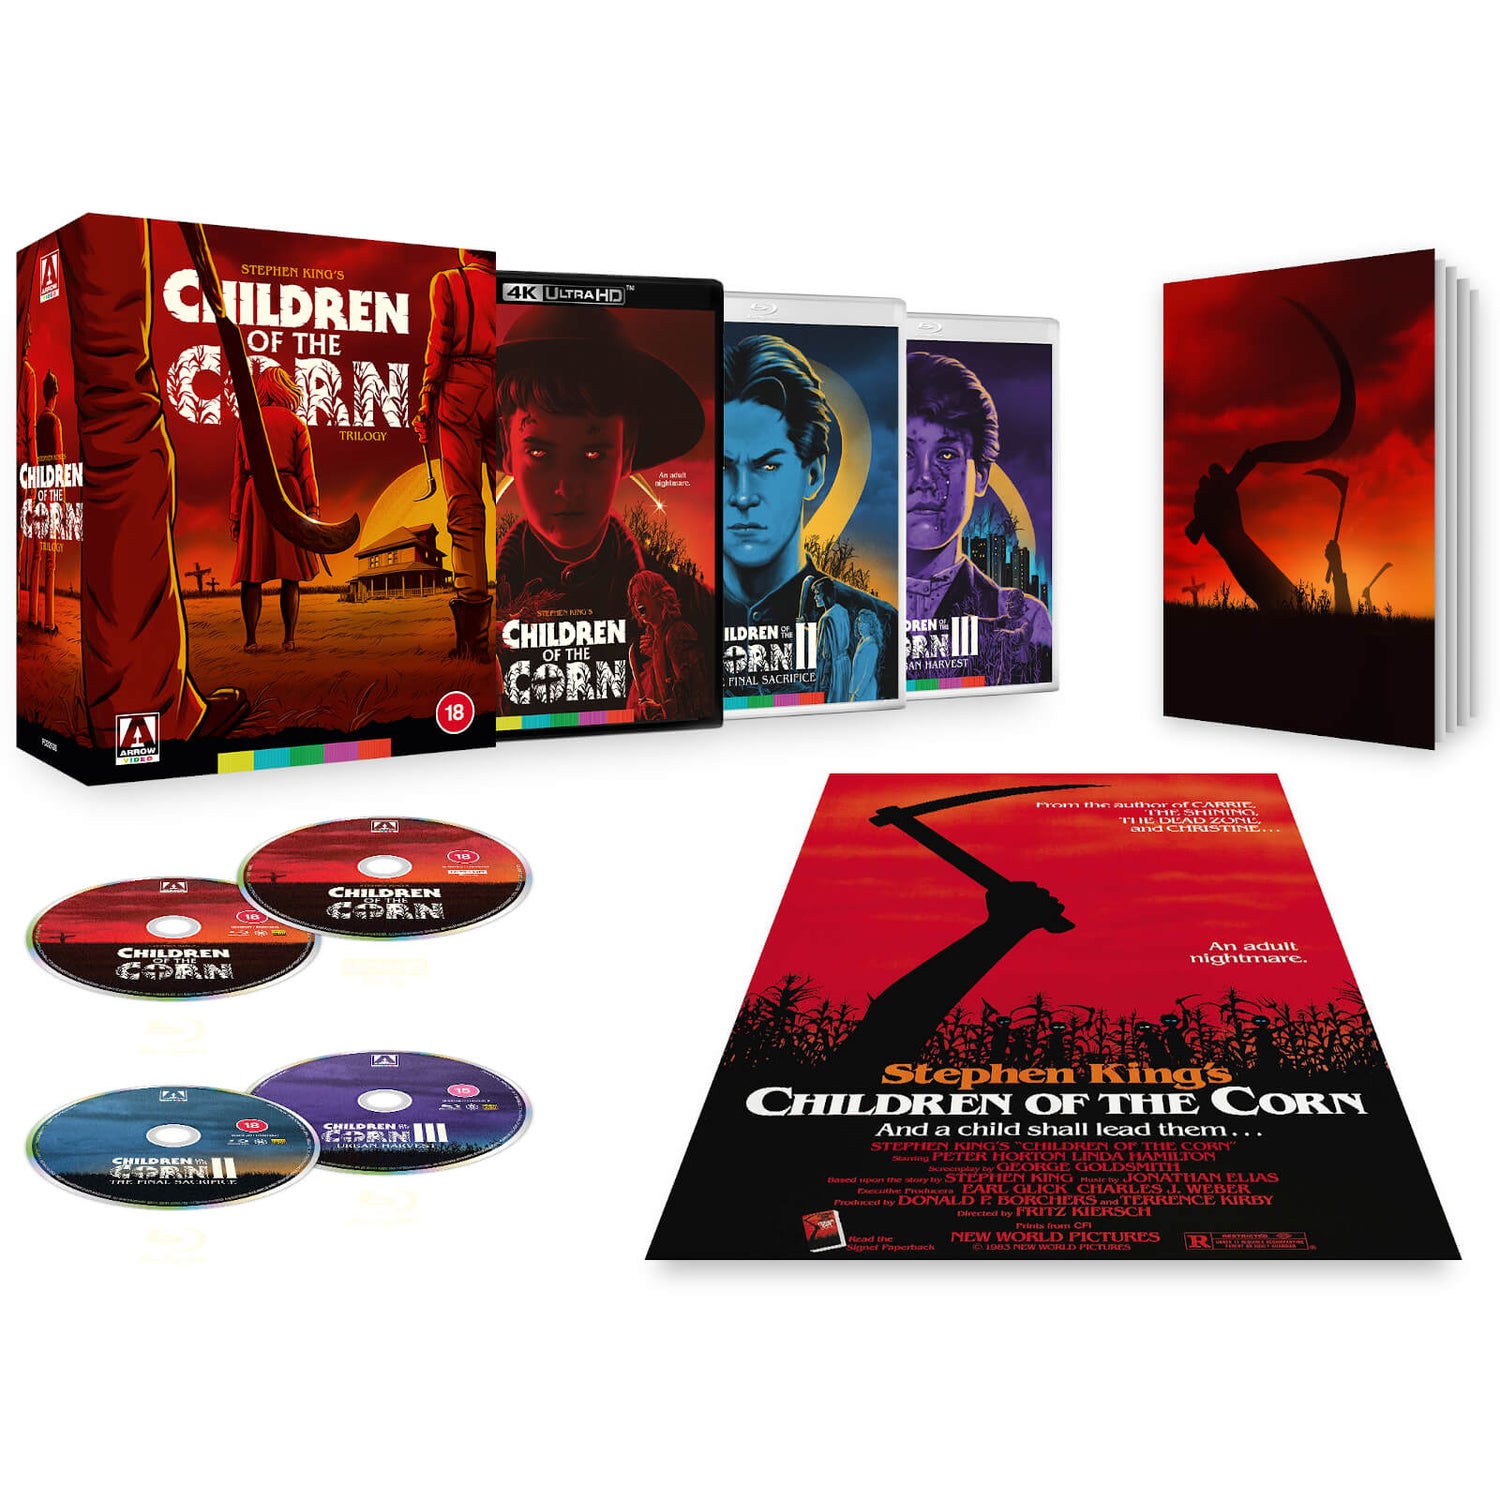 Children Of The Corn Trilogy Limited Edition 4K UHD+Blu-ray